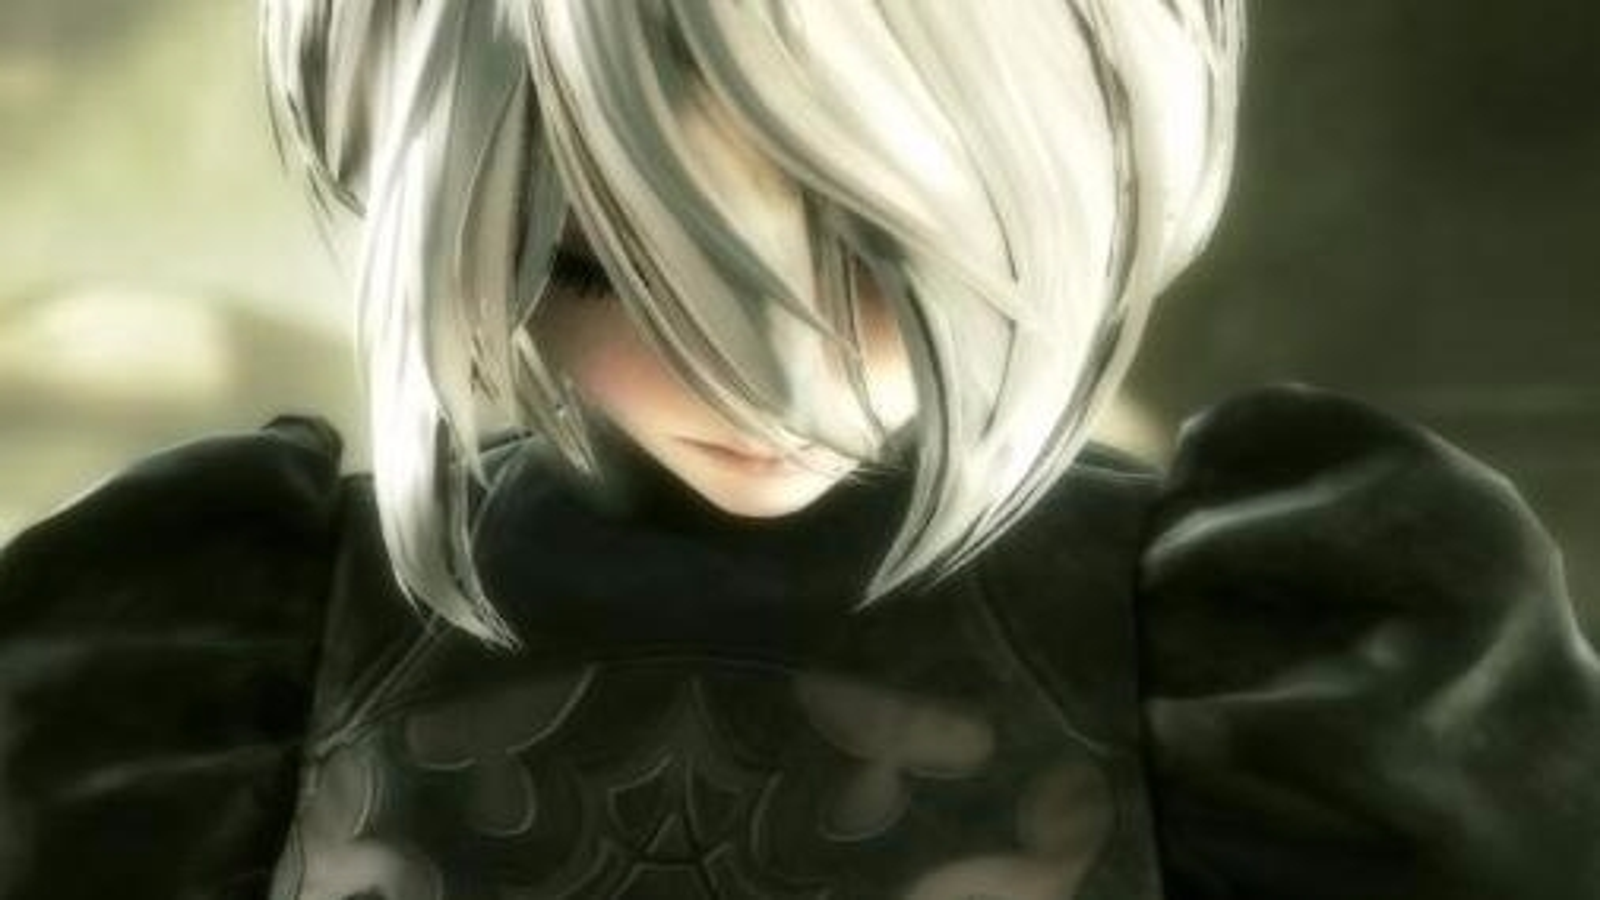 NieR: Automata is Square Enix's best game and game of the generation